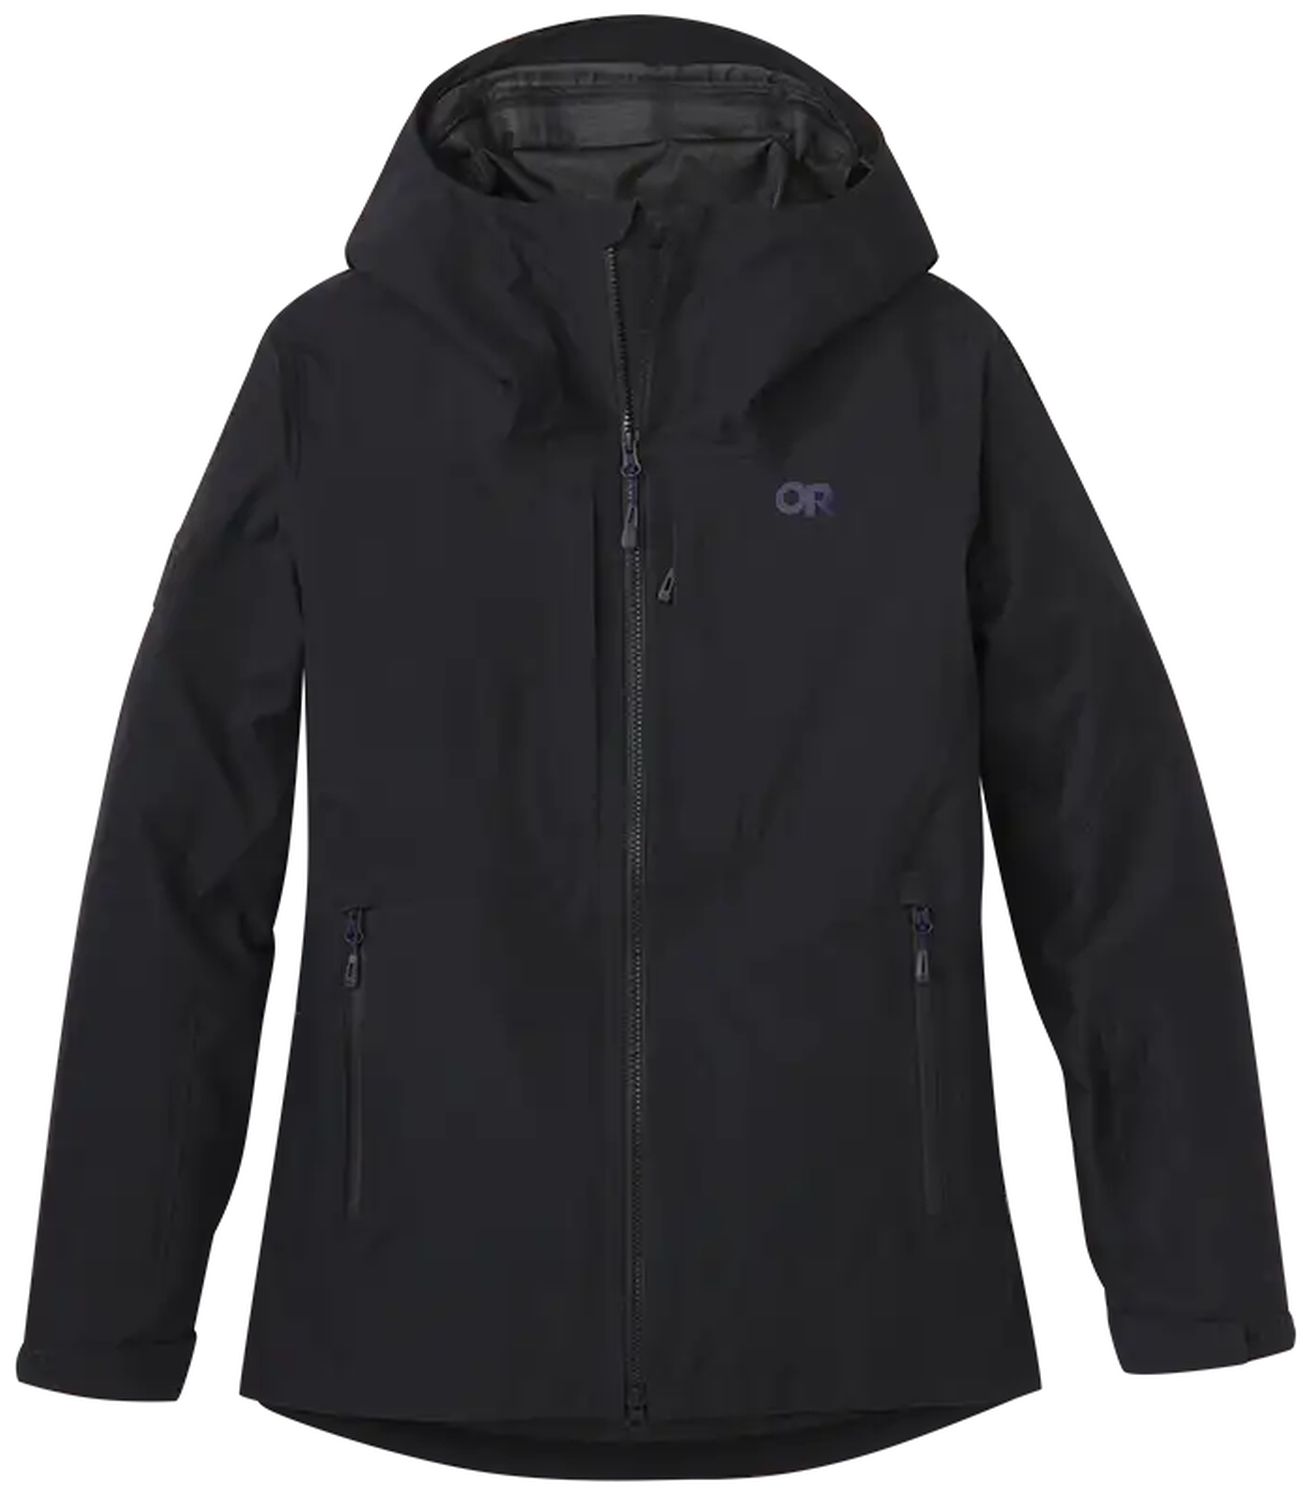 Outdoor Research Skytour AscentShell Jacket - Women's